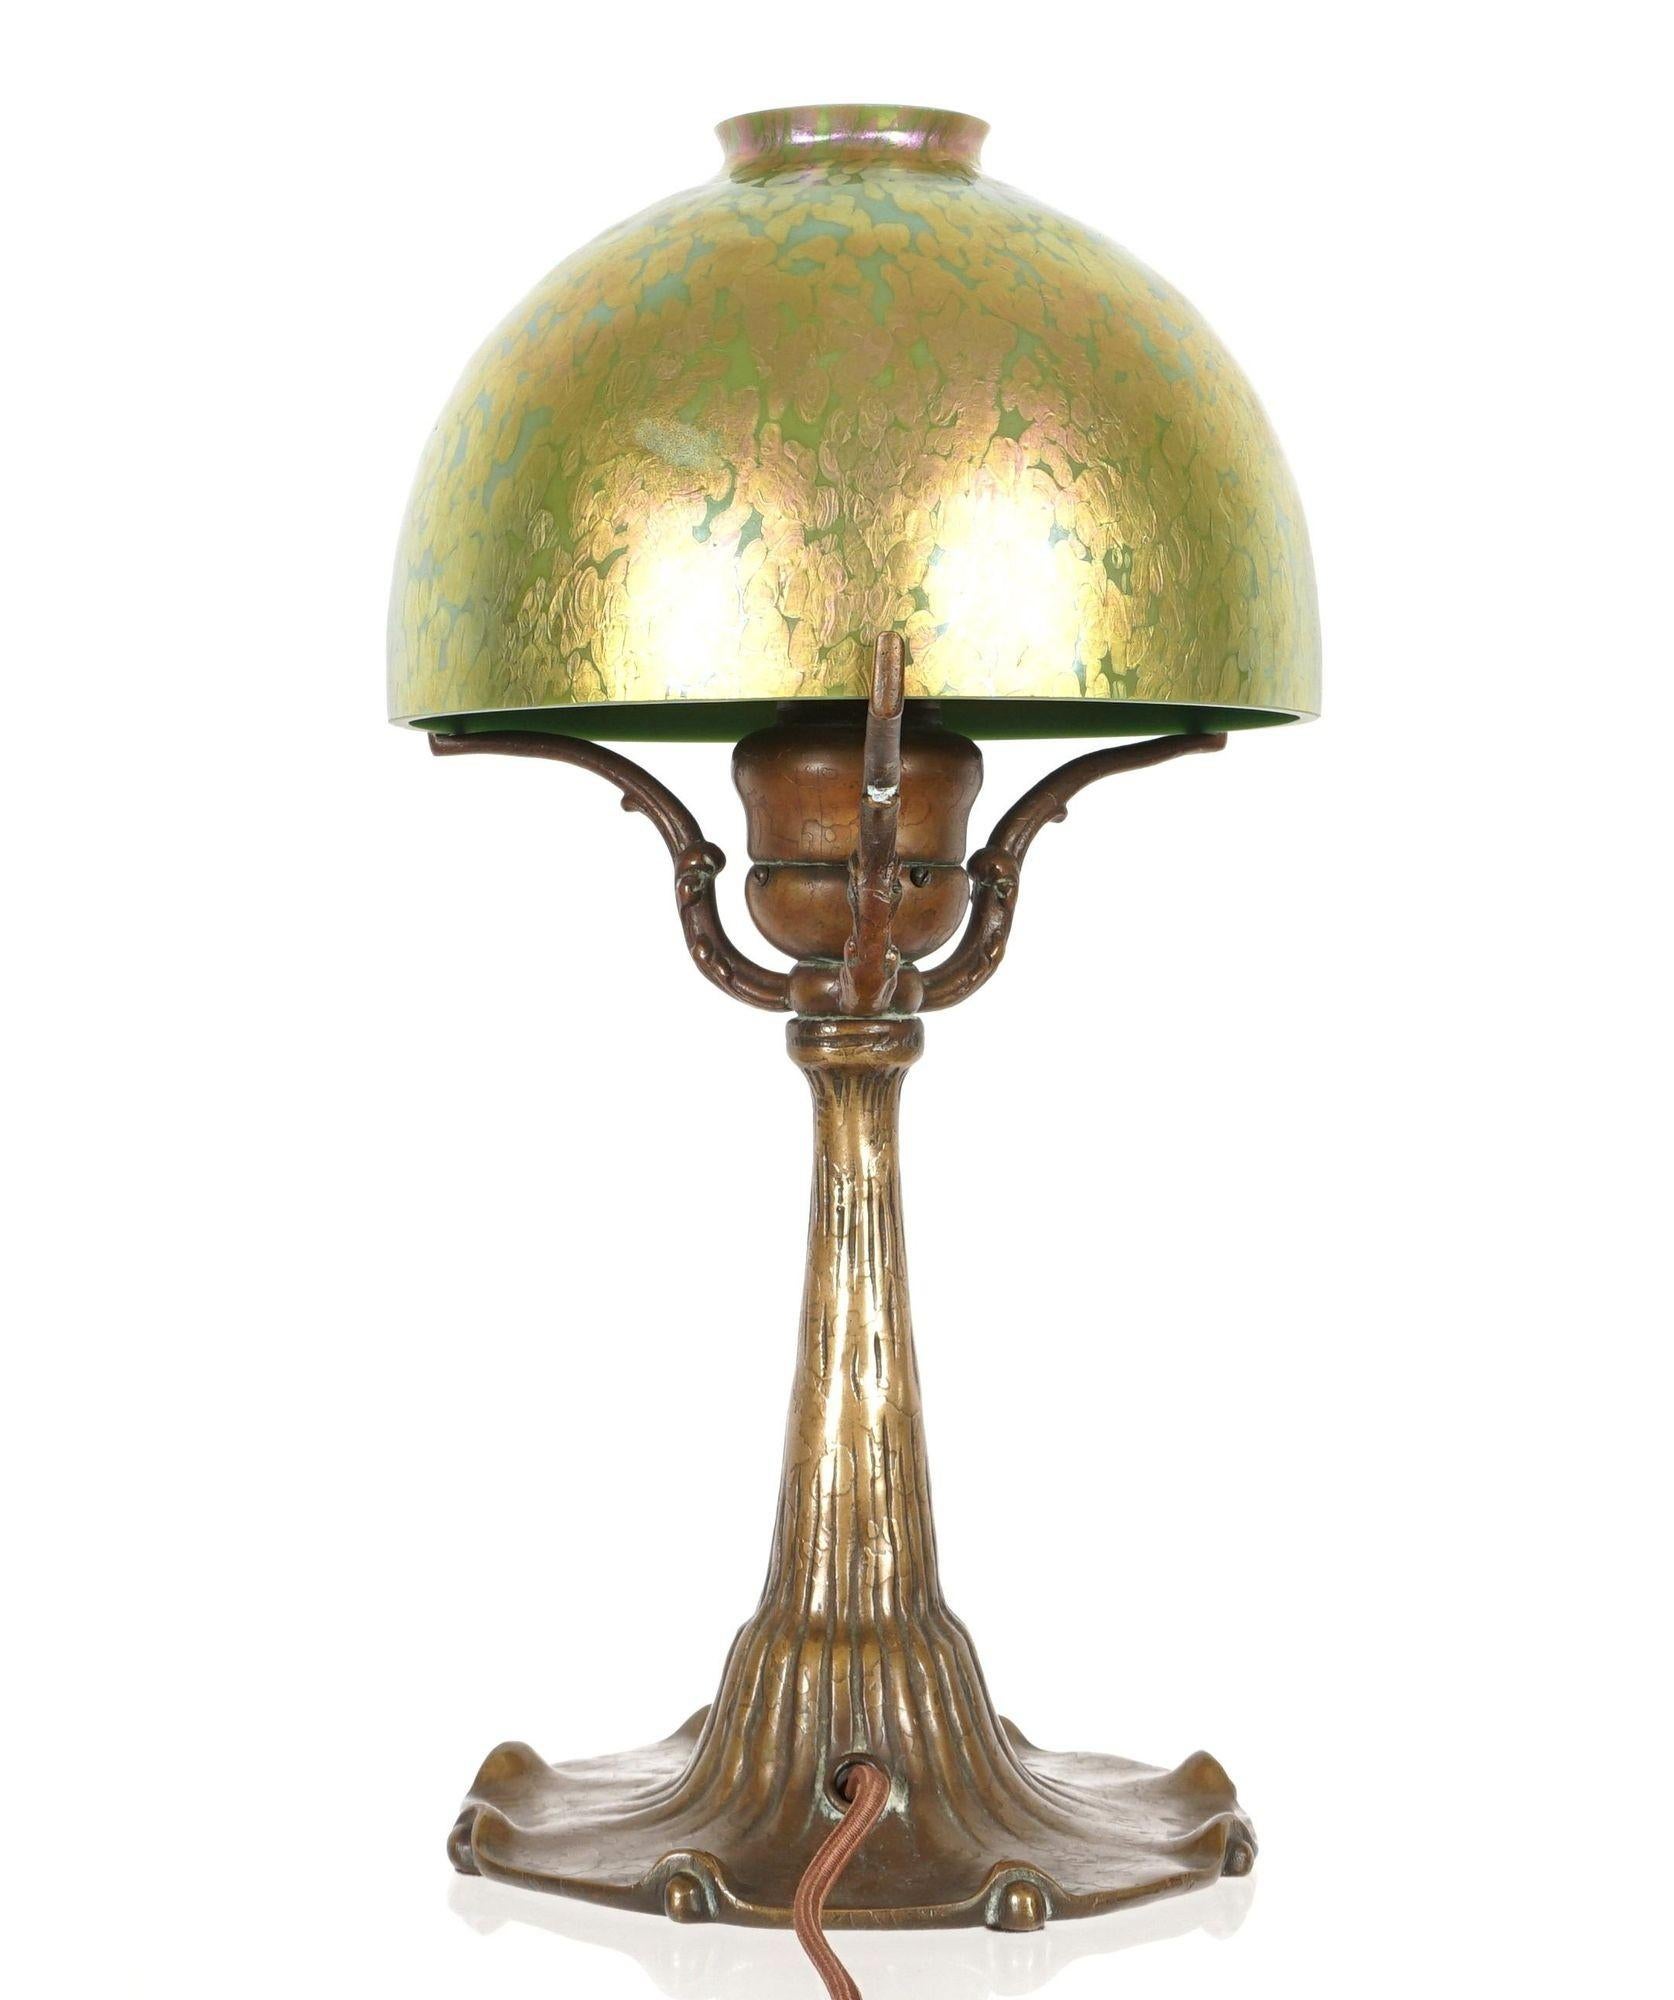 A Tiffany Studios patinated bronze table lamp marked 